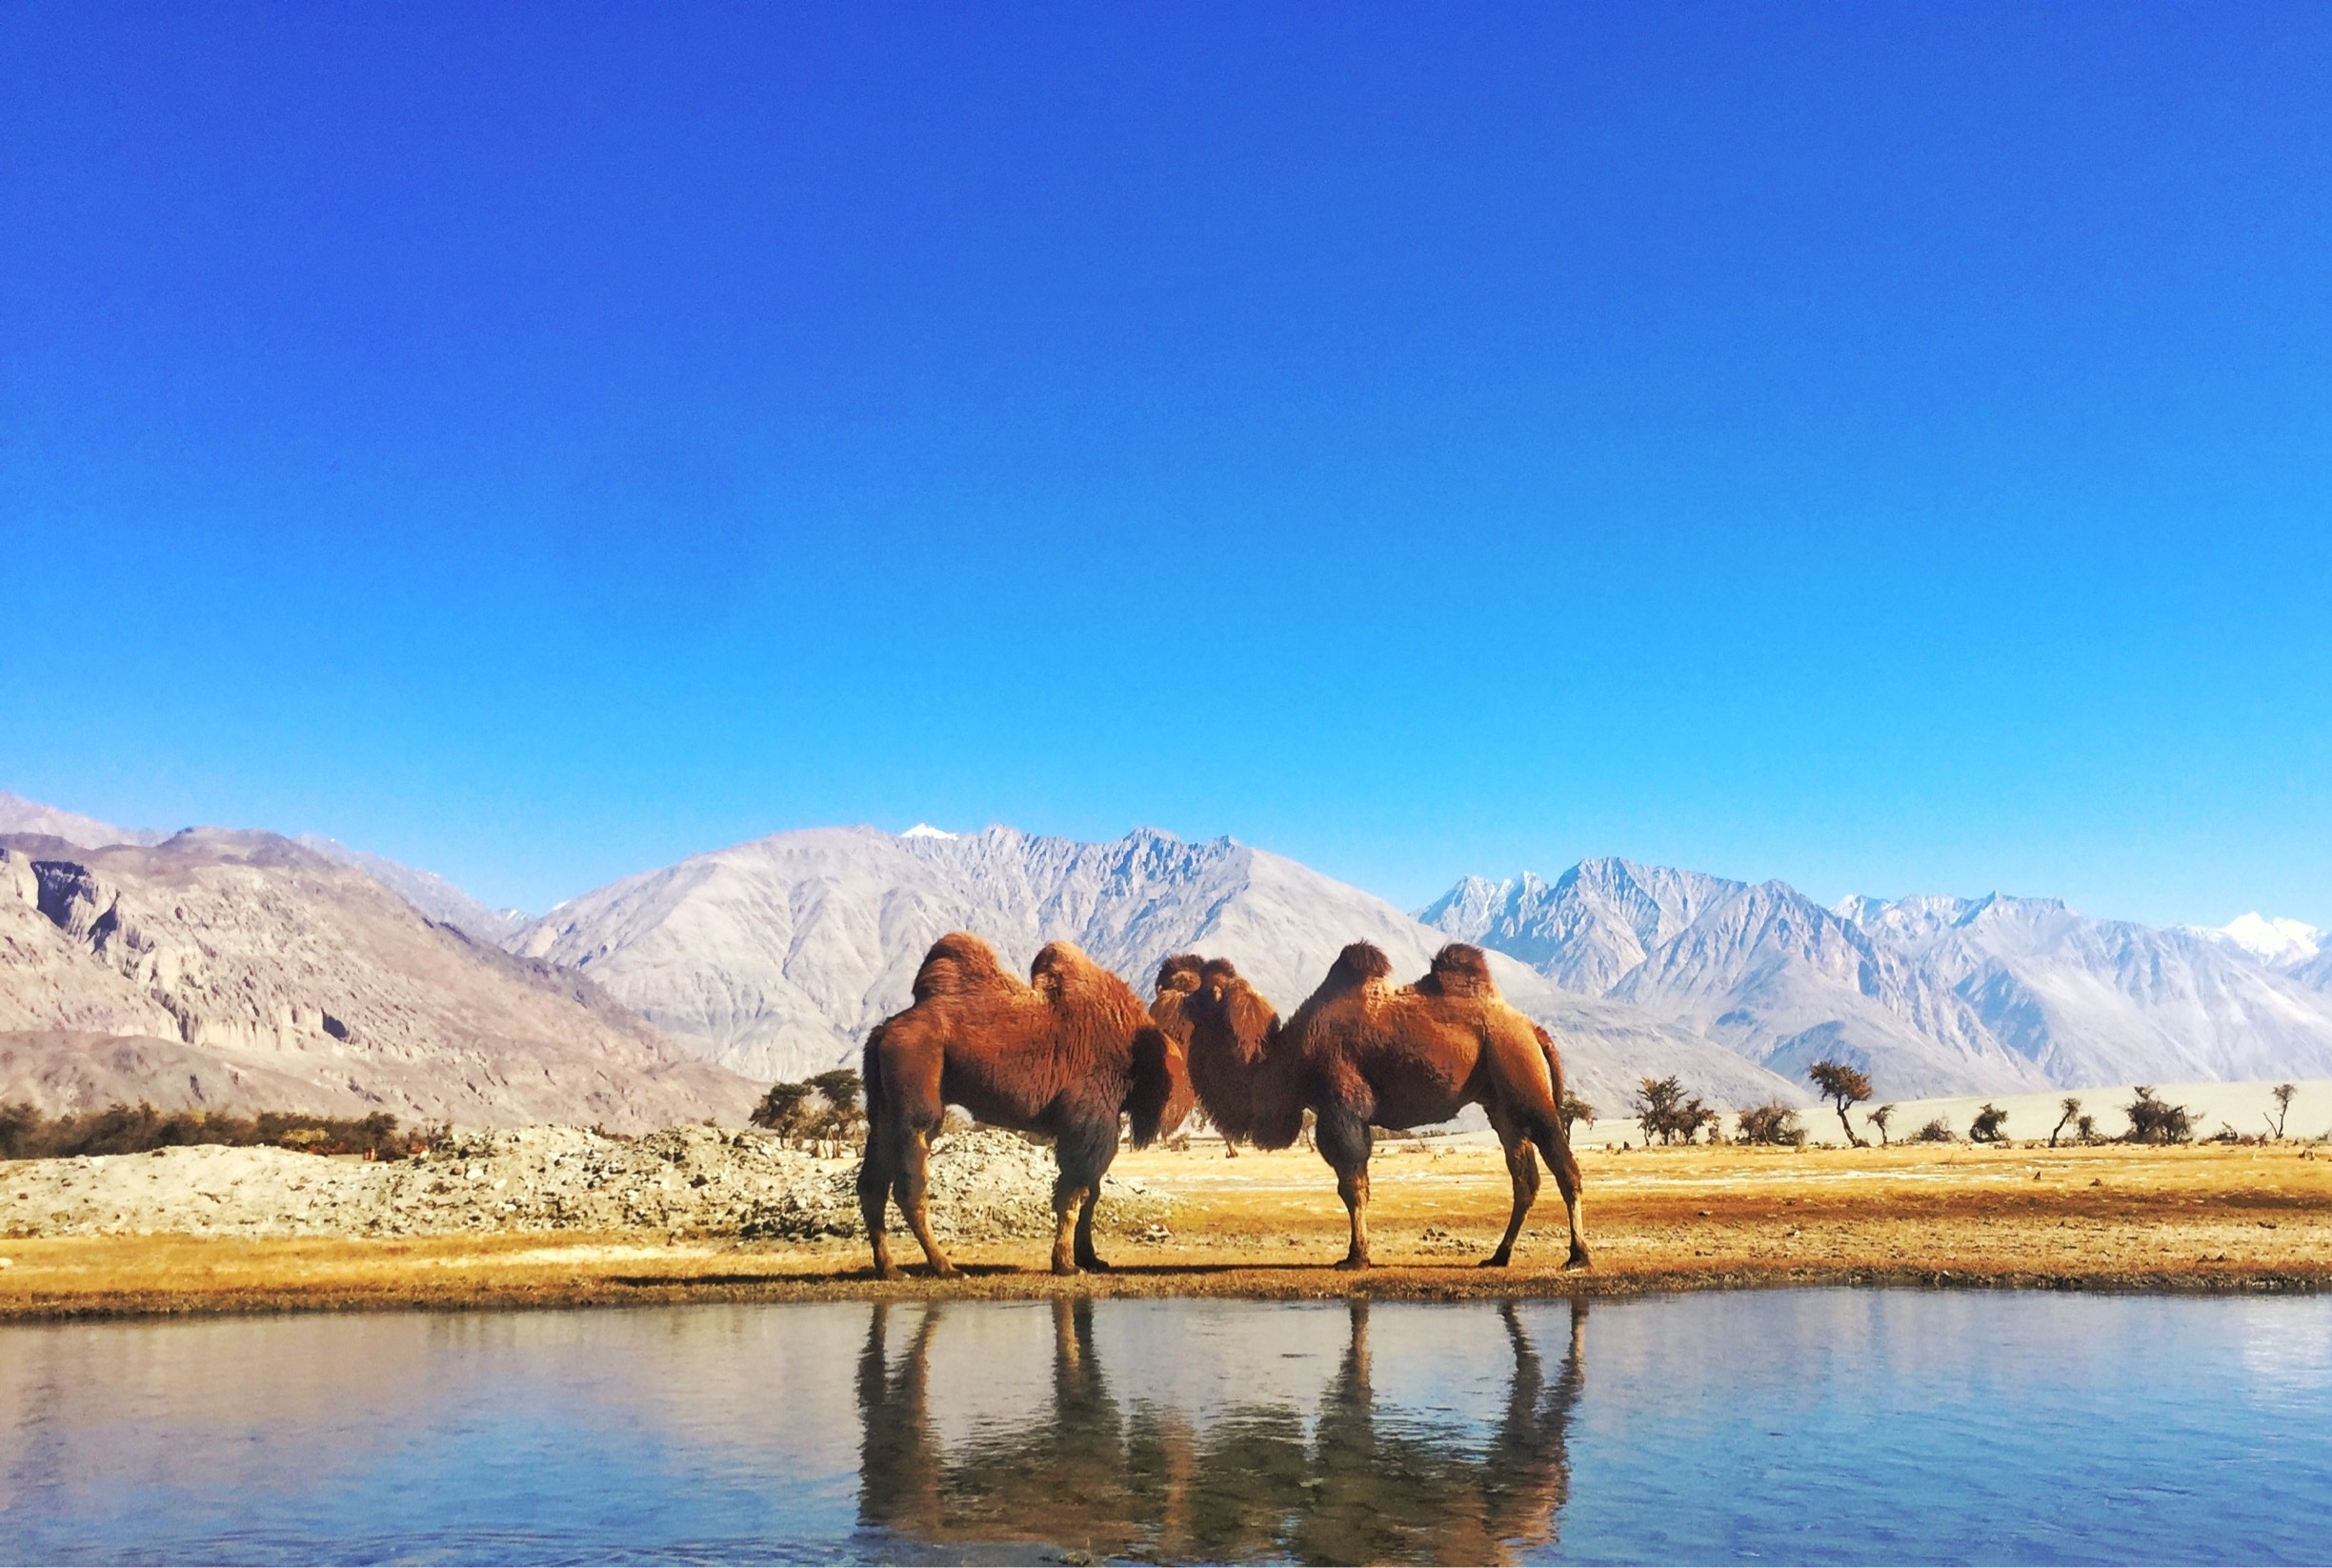 Double hump camel or bactarian camel is found mostly in Central Asia but in Ladakh we have a sizeable population as it is proctected. In this picture we see two of them just after finishing with drinking water.